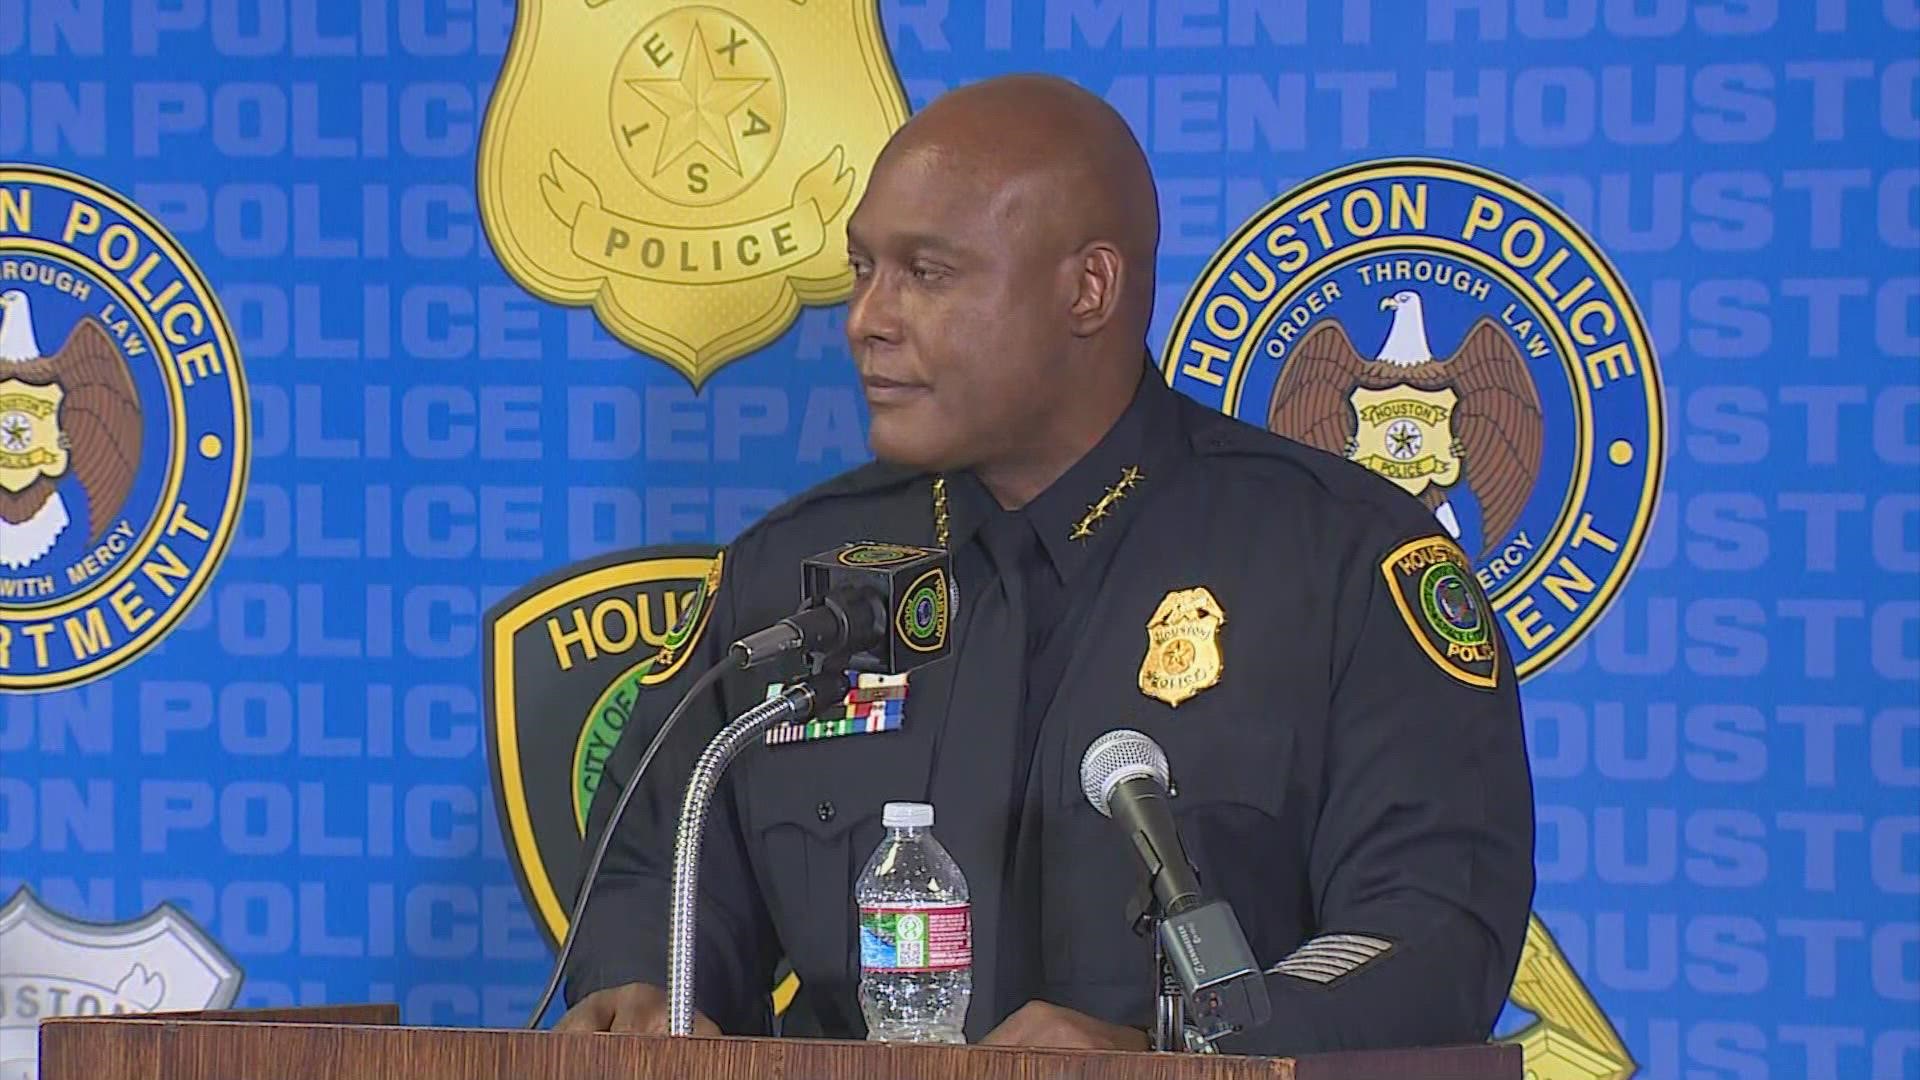 Houston Police Chief Troy Finner held a news conference Wednesday to provide updates on the investigation into the tragedy at the Astroworld Festival last week.